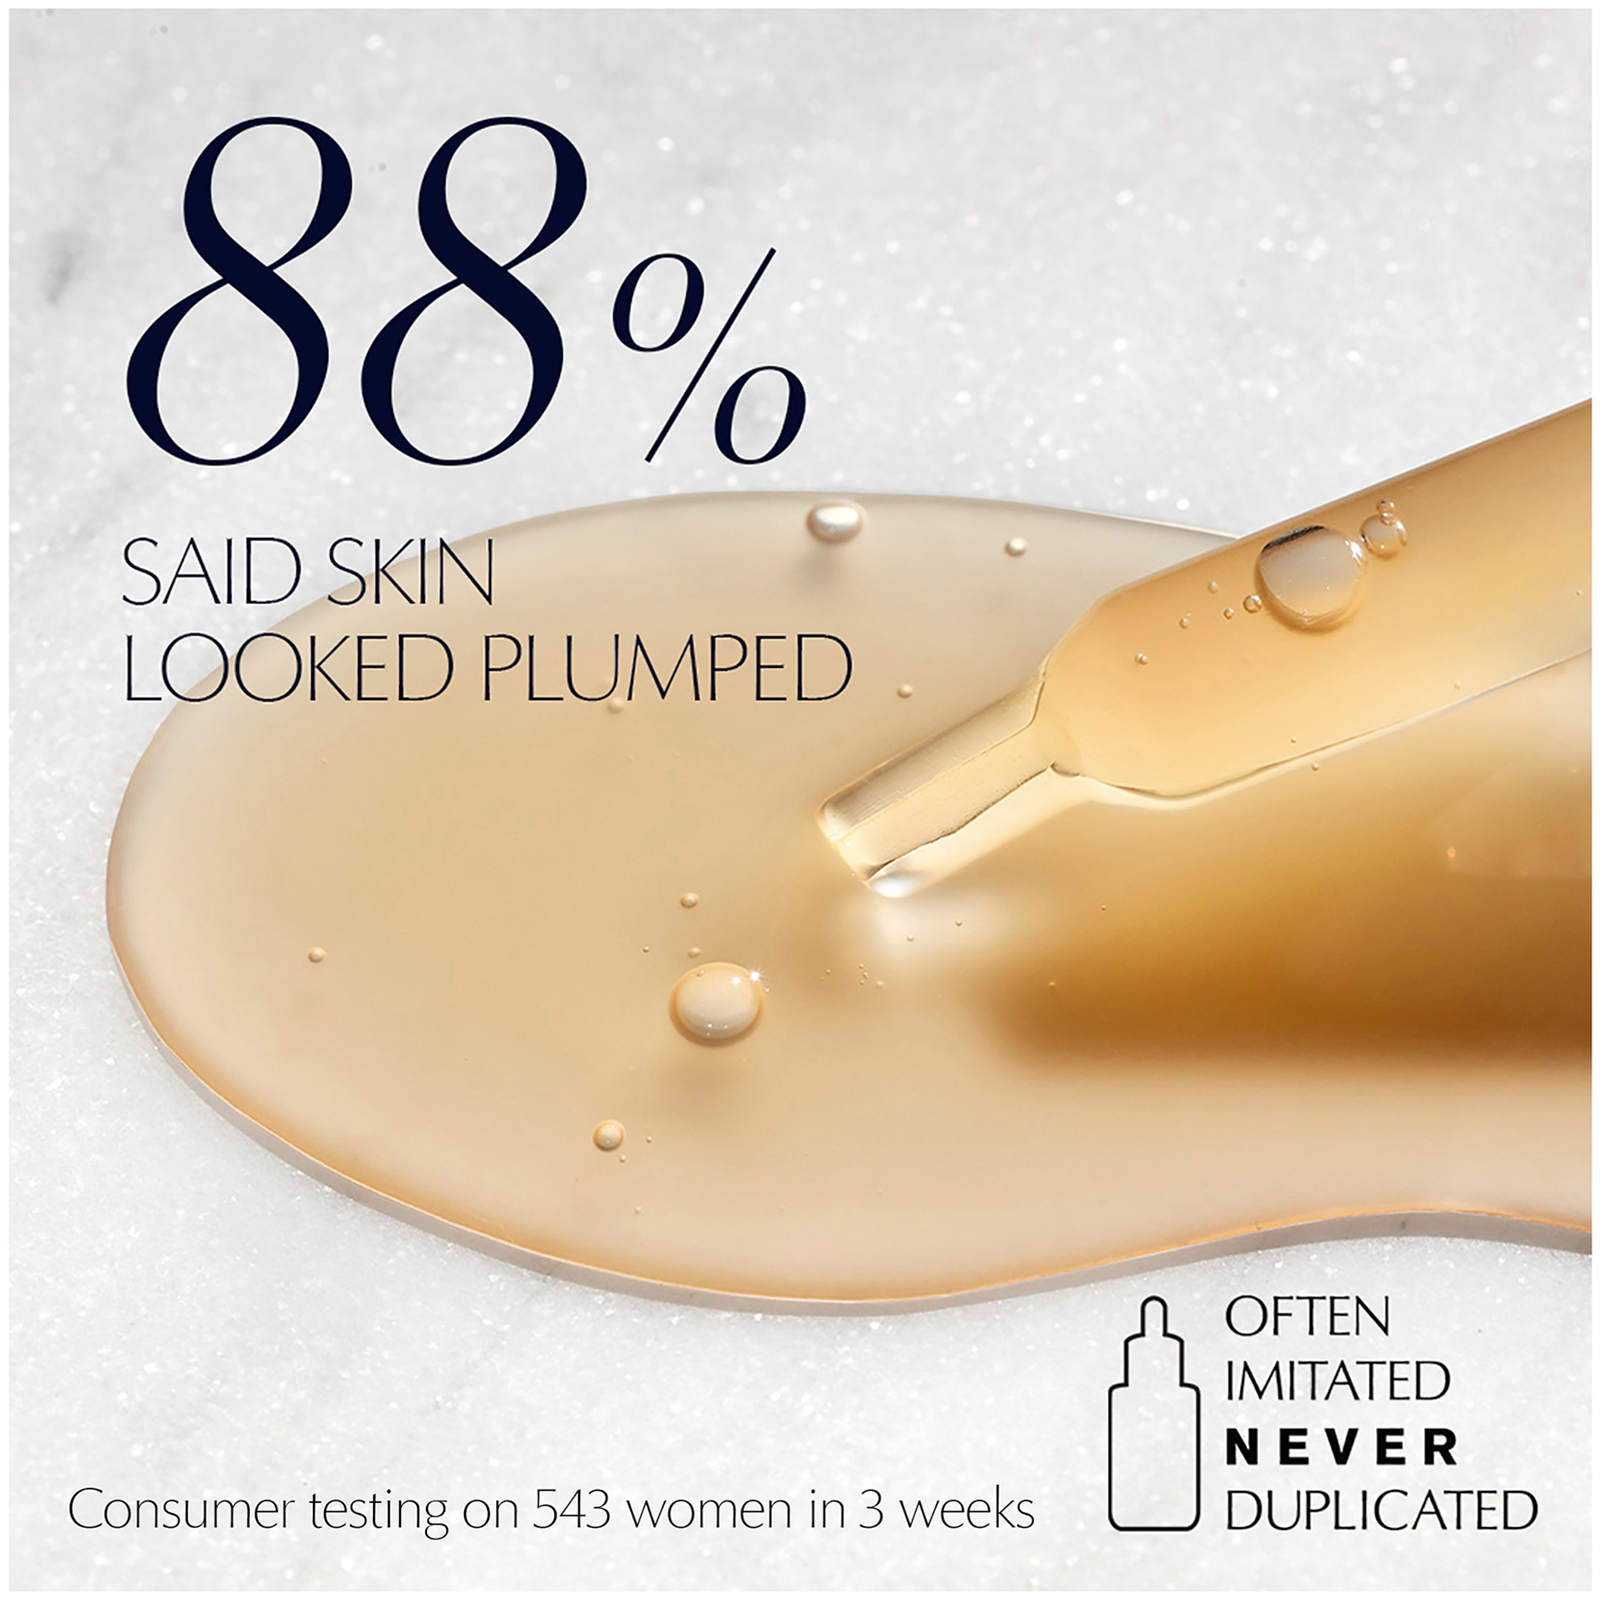 88% said skin looked plumped, consumer testing on 543 women in 3 weeks, often imitated never duplicated